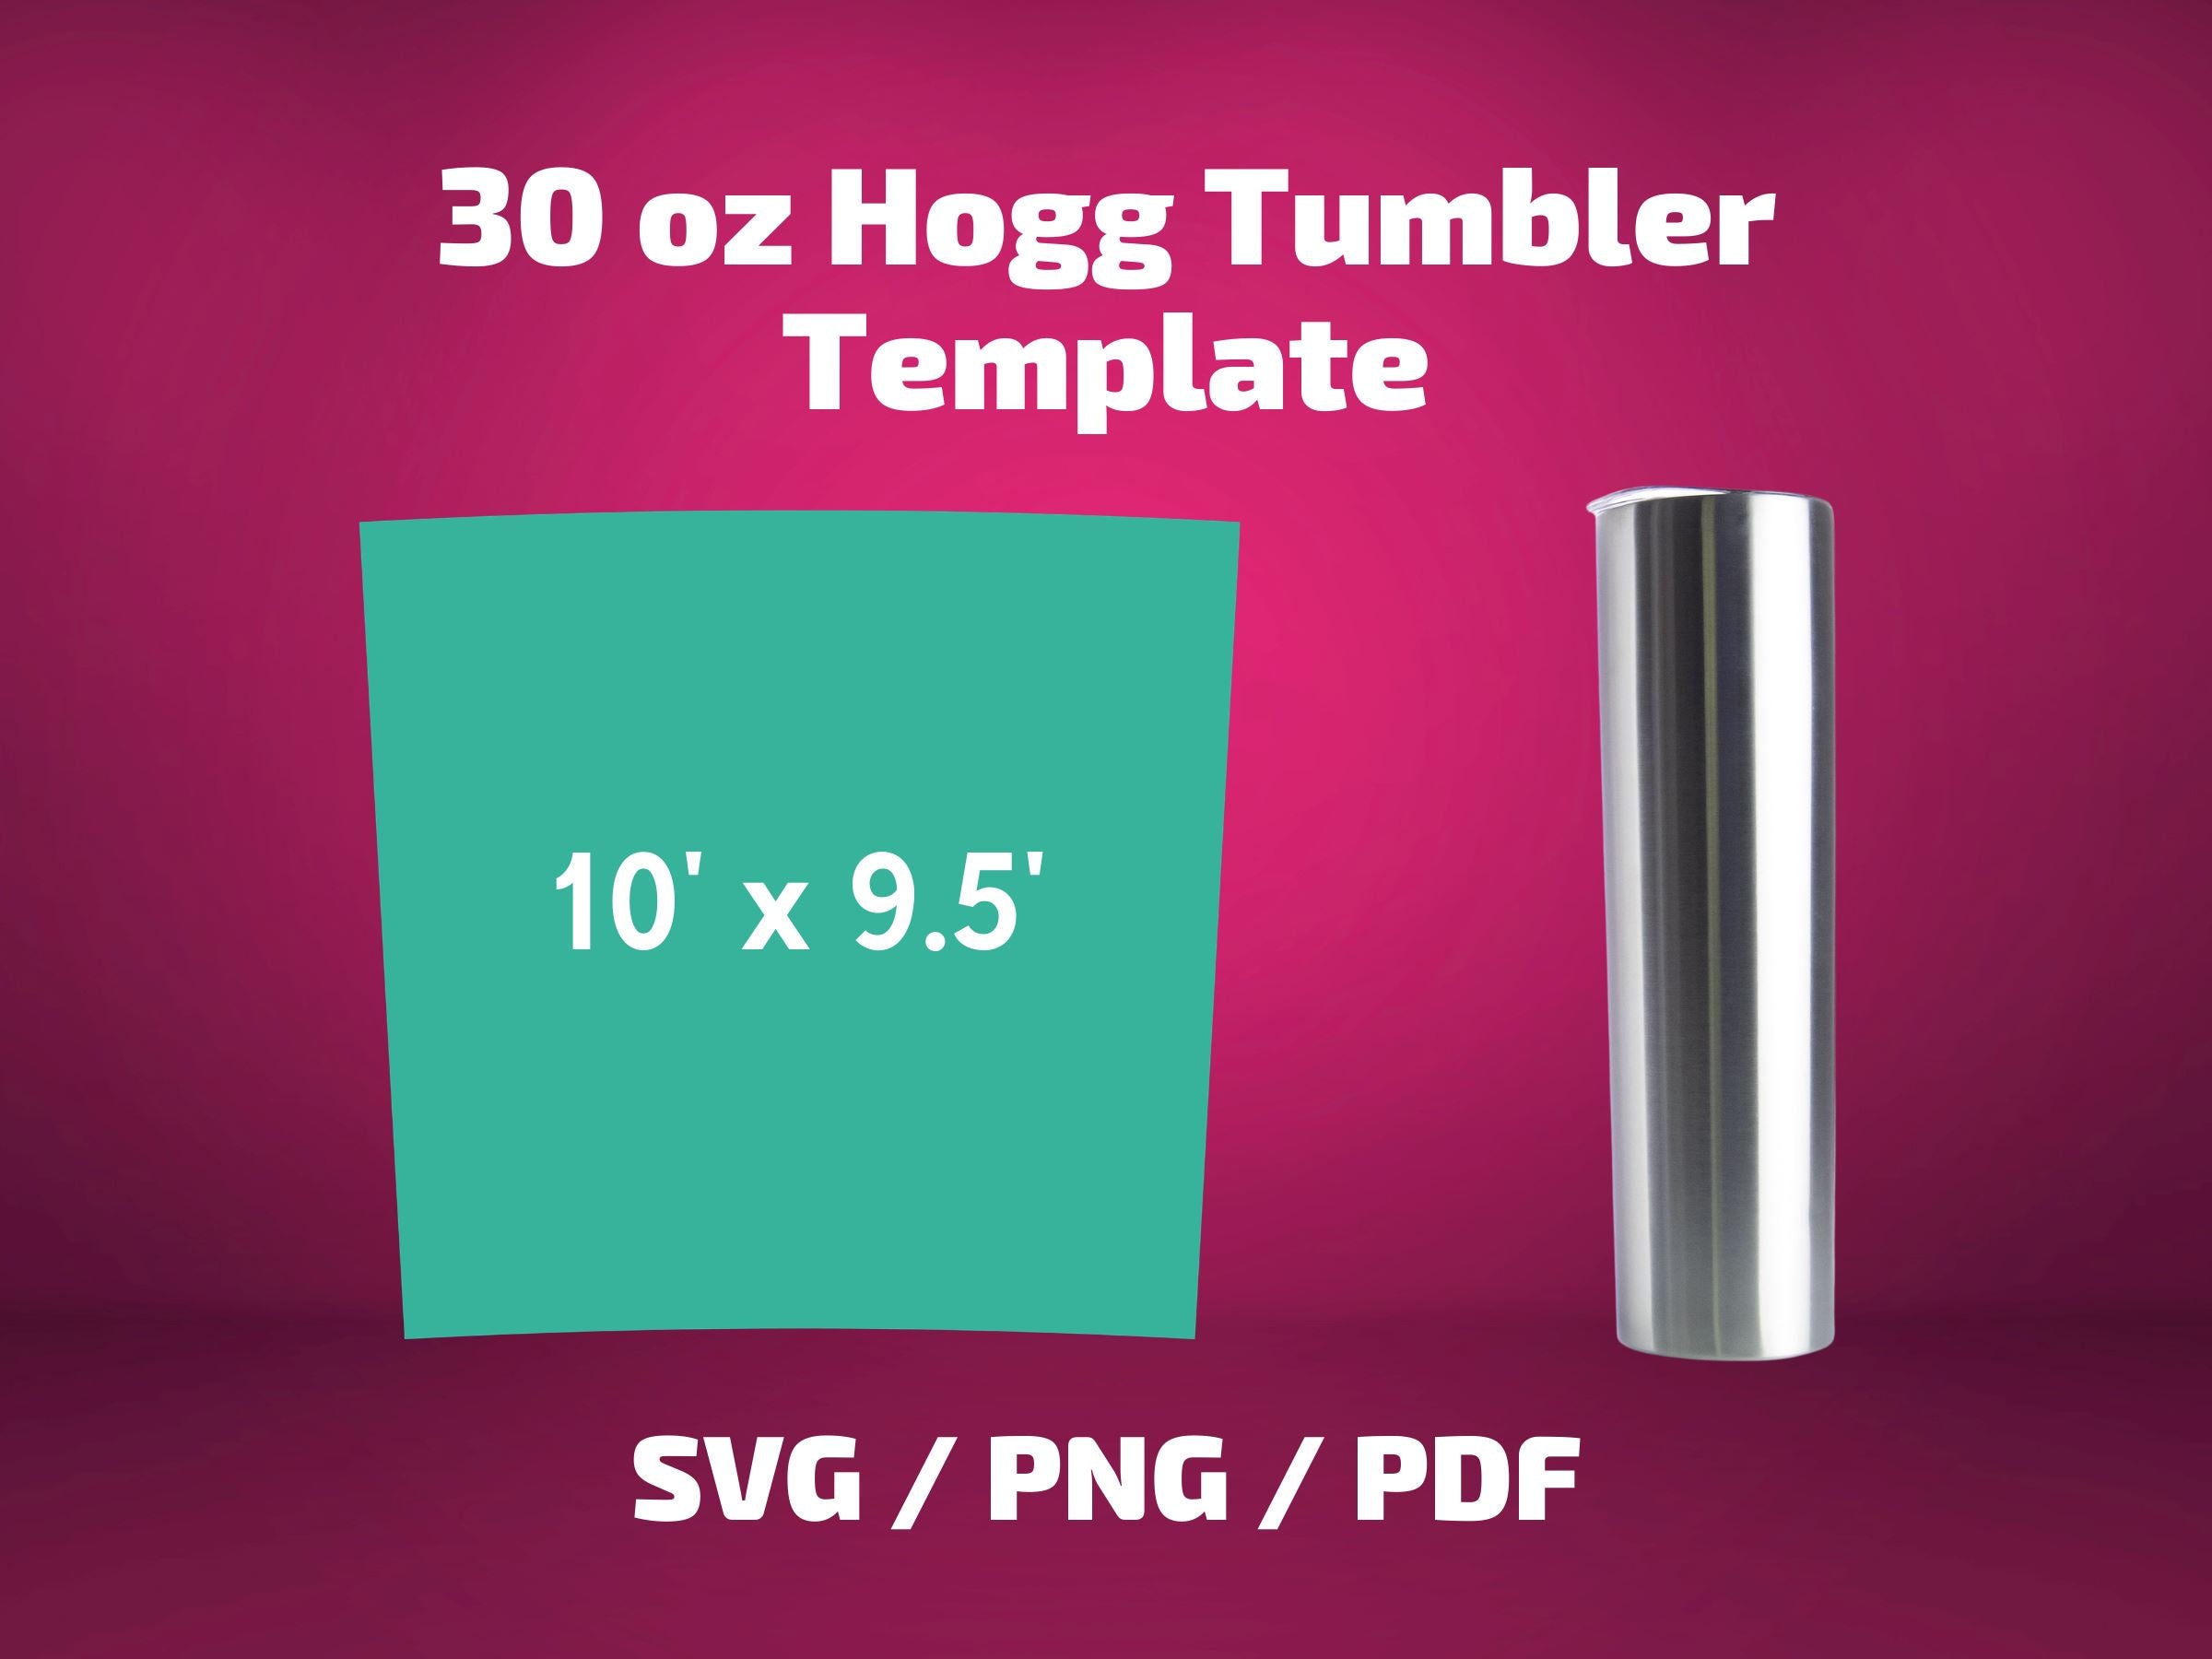 Hogg Skinny with handle 20oz Template Tumbler Full Wrap For 20oz Hoggdle  Skinny Tumbler template Cricut and Slhouette Svg Dxf Eps Png Pdf